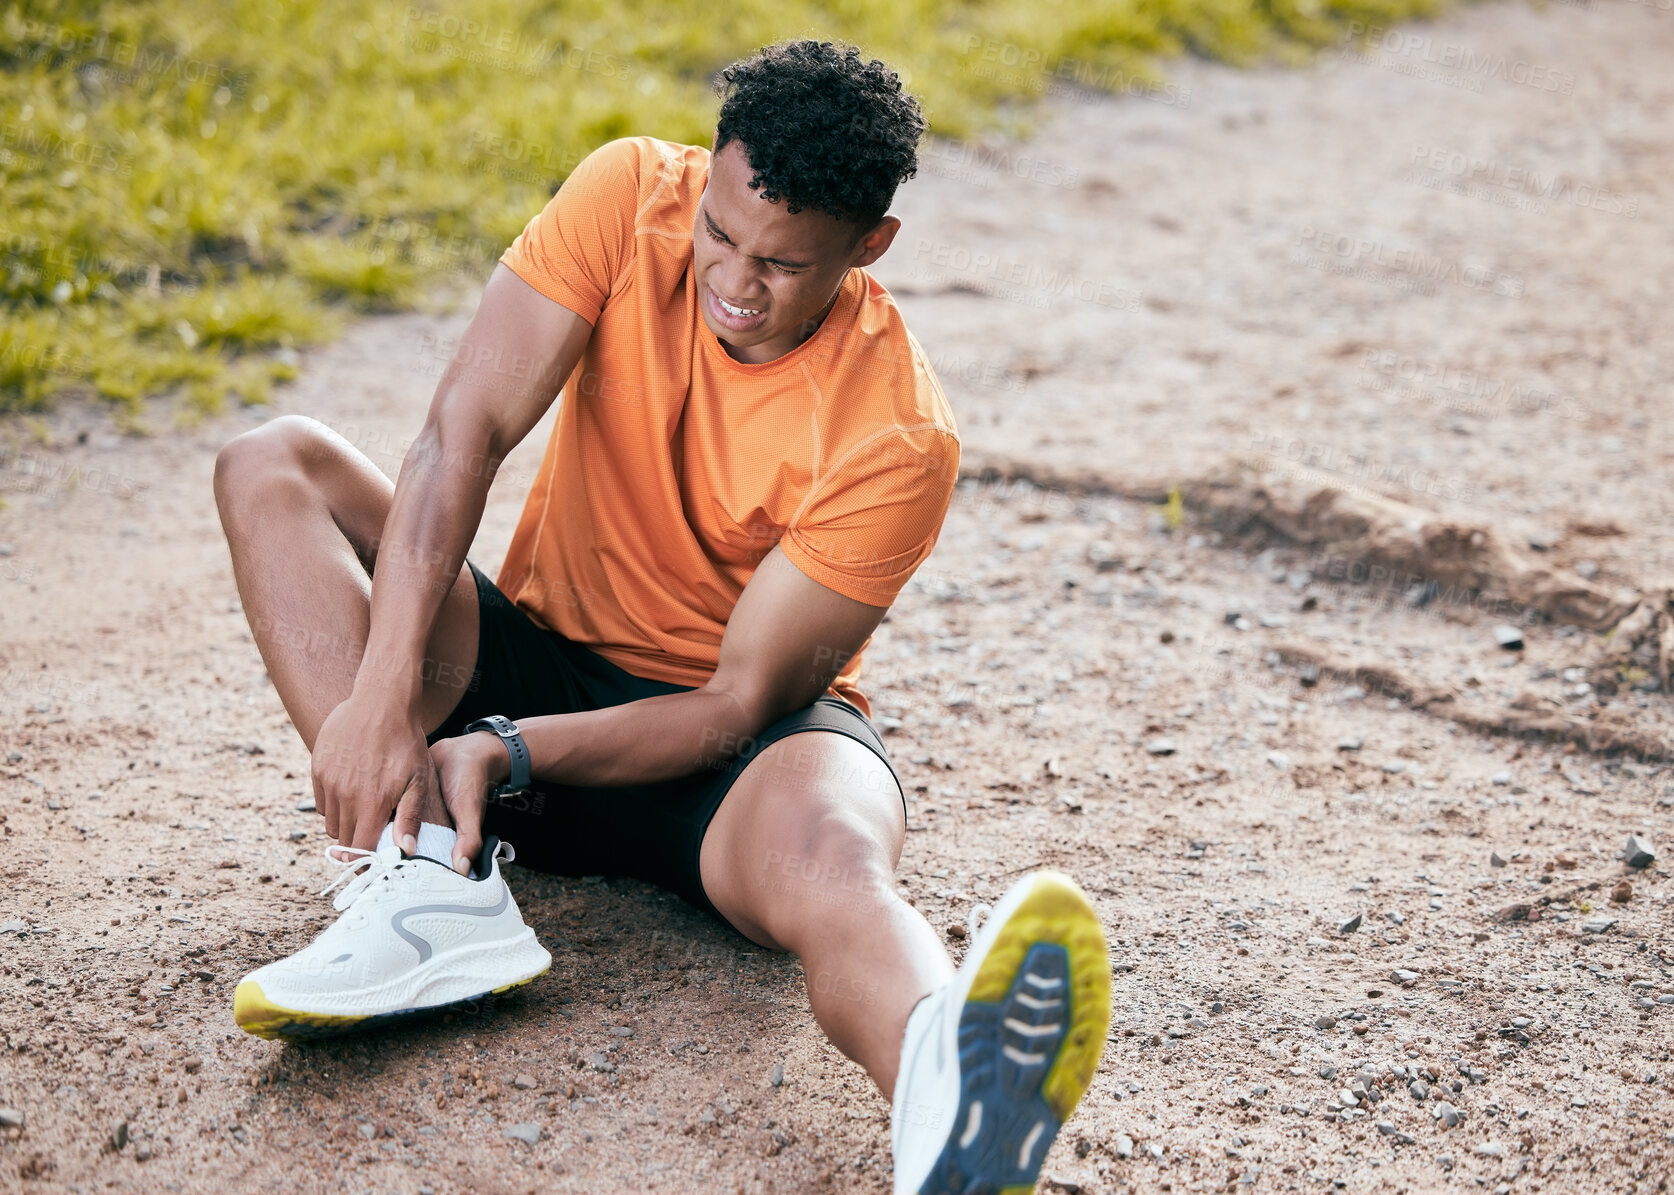 Buy stock photo Full length shot of a young man sitting alone outside and suffering from an ankle injury during his workout